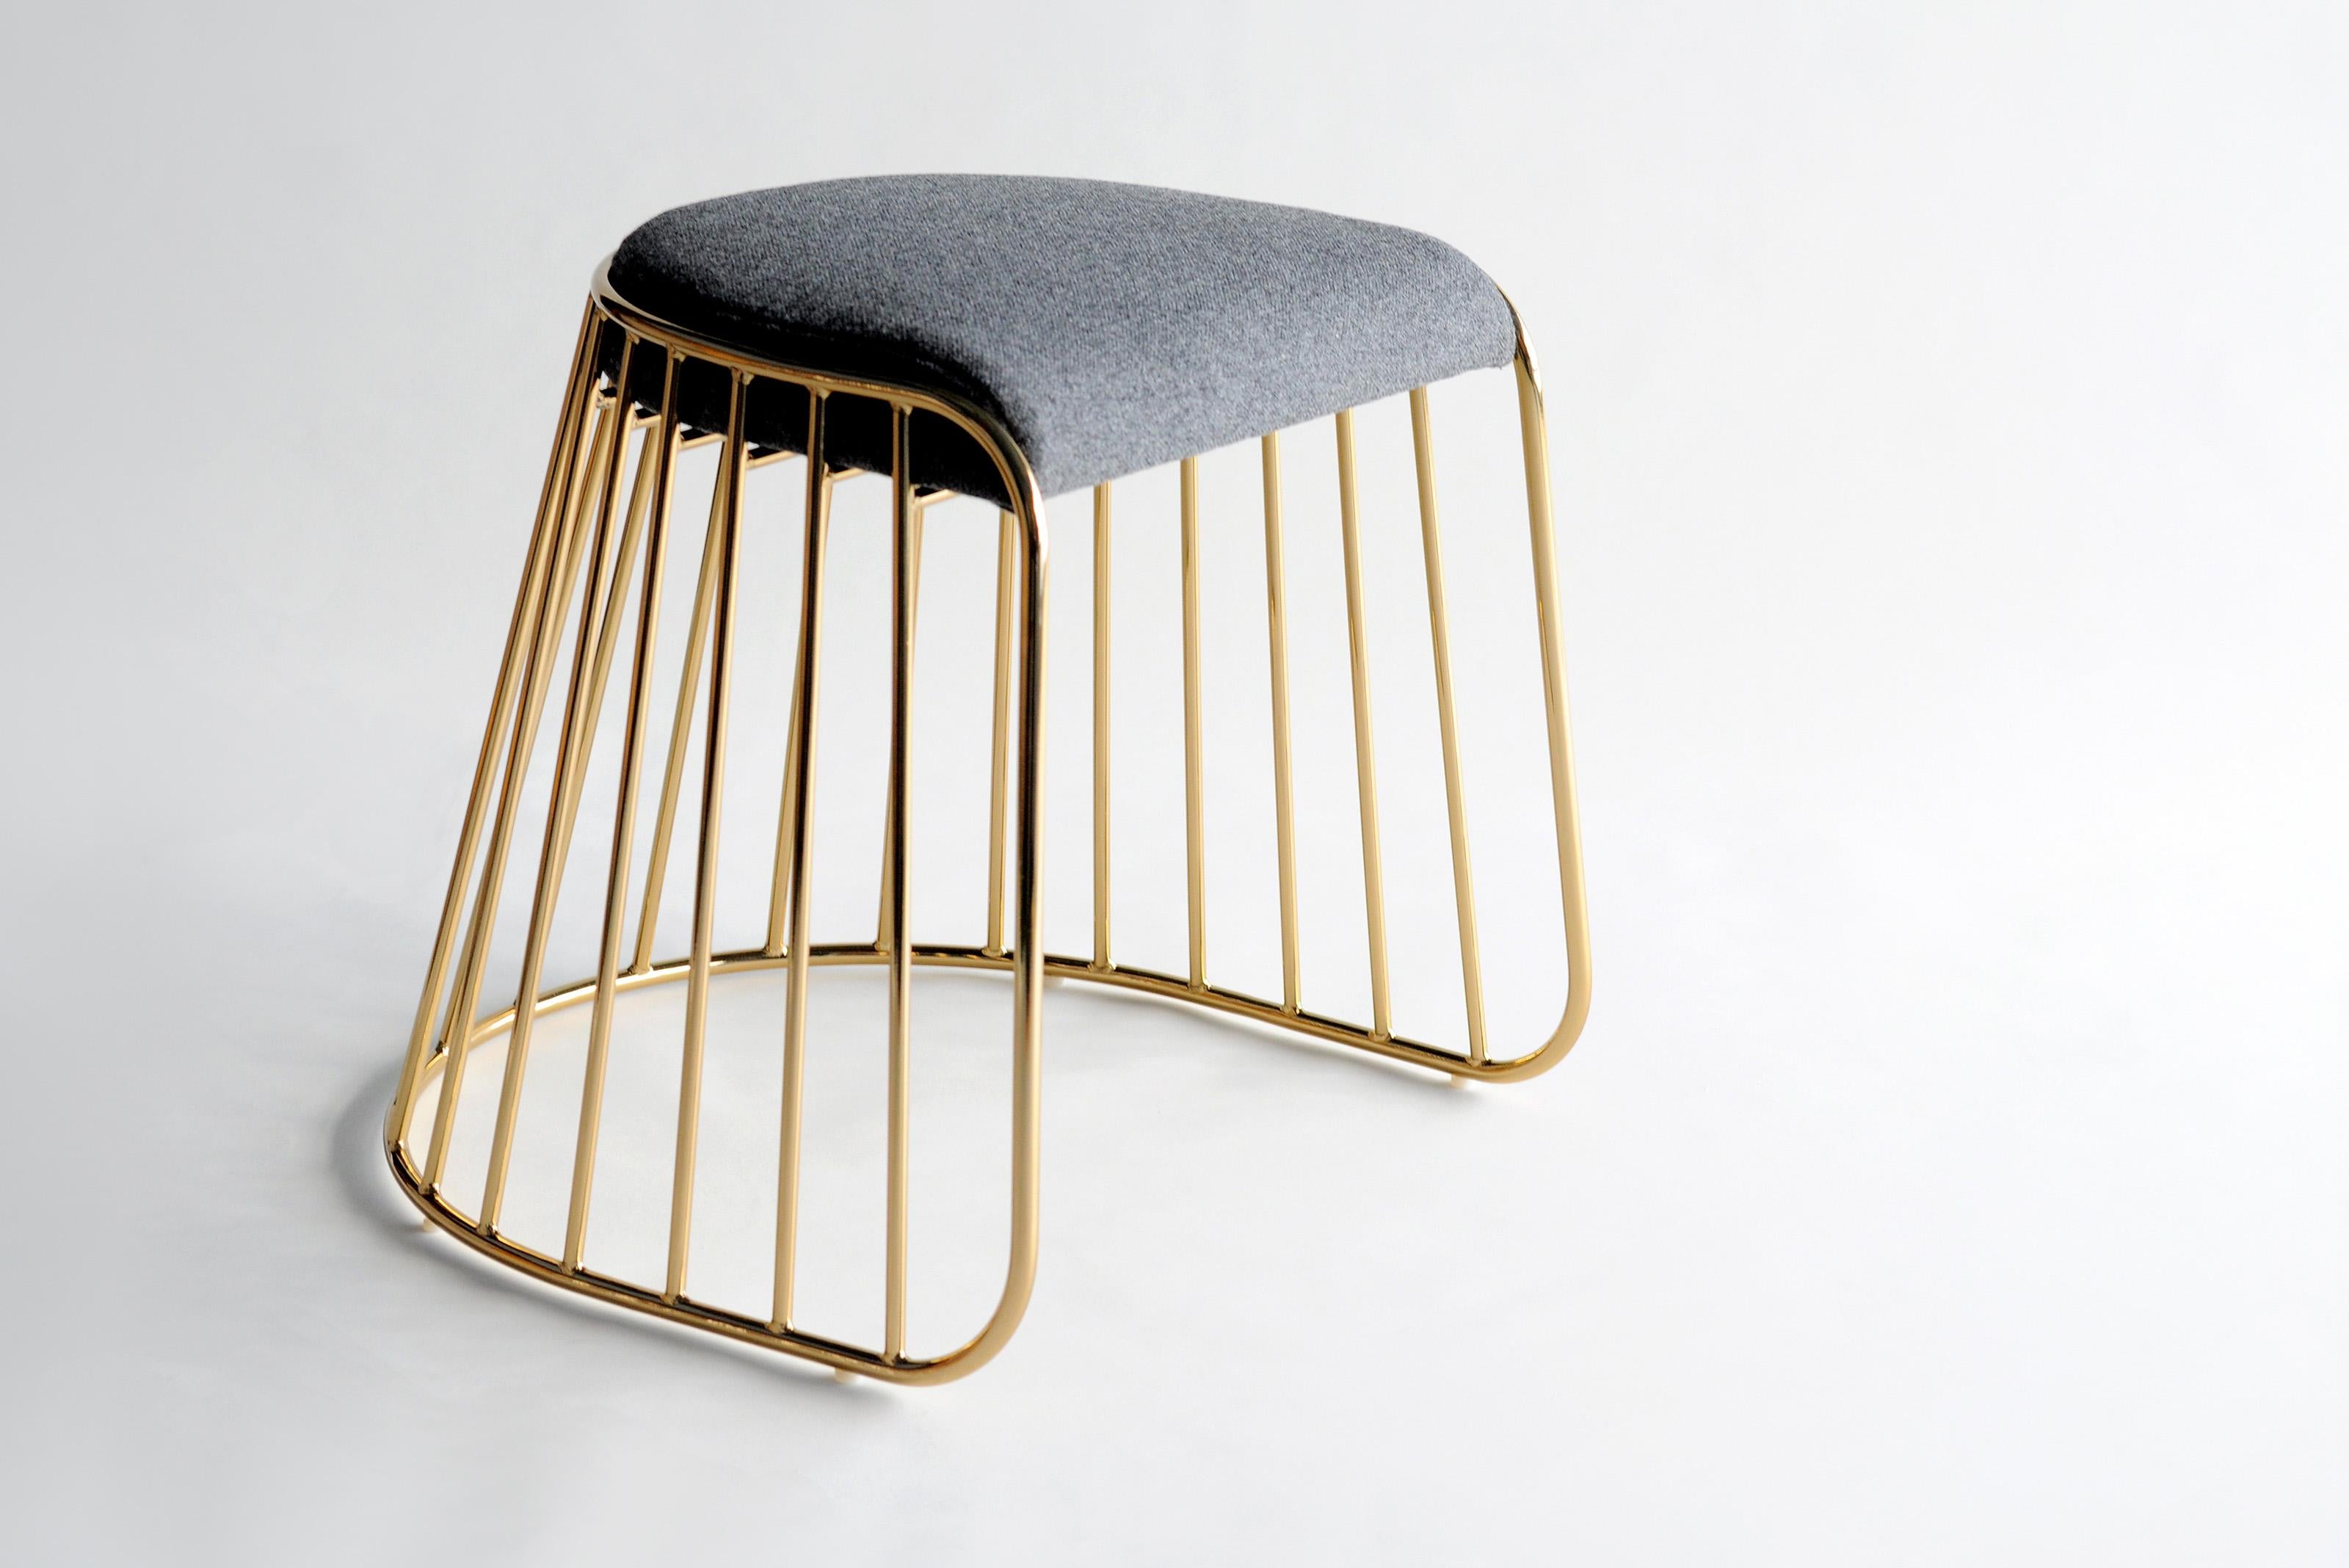 Bride’s Veil Low Stool by Phase Design
Dimensions: D 52,1 x W 53,3 x H 45,7 cm.
Materials: Upholstery, steel and smoked brass.

Solid steel bar available in a smoked brass, polished chrome, burnt copper, or powder coat finish with upholstered top.